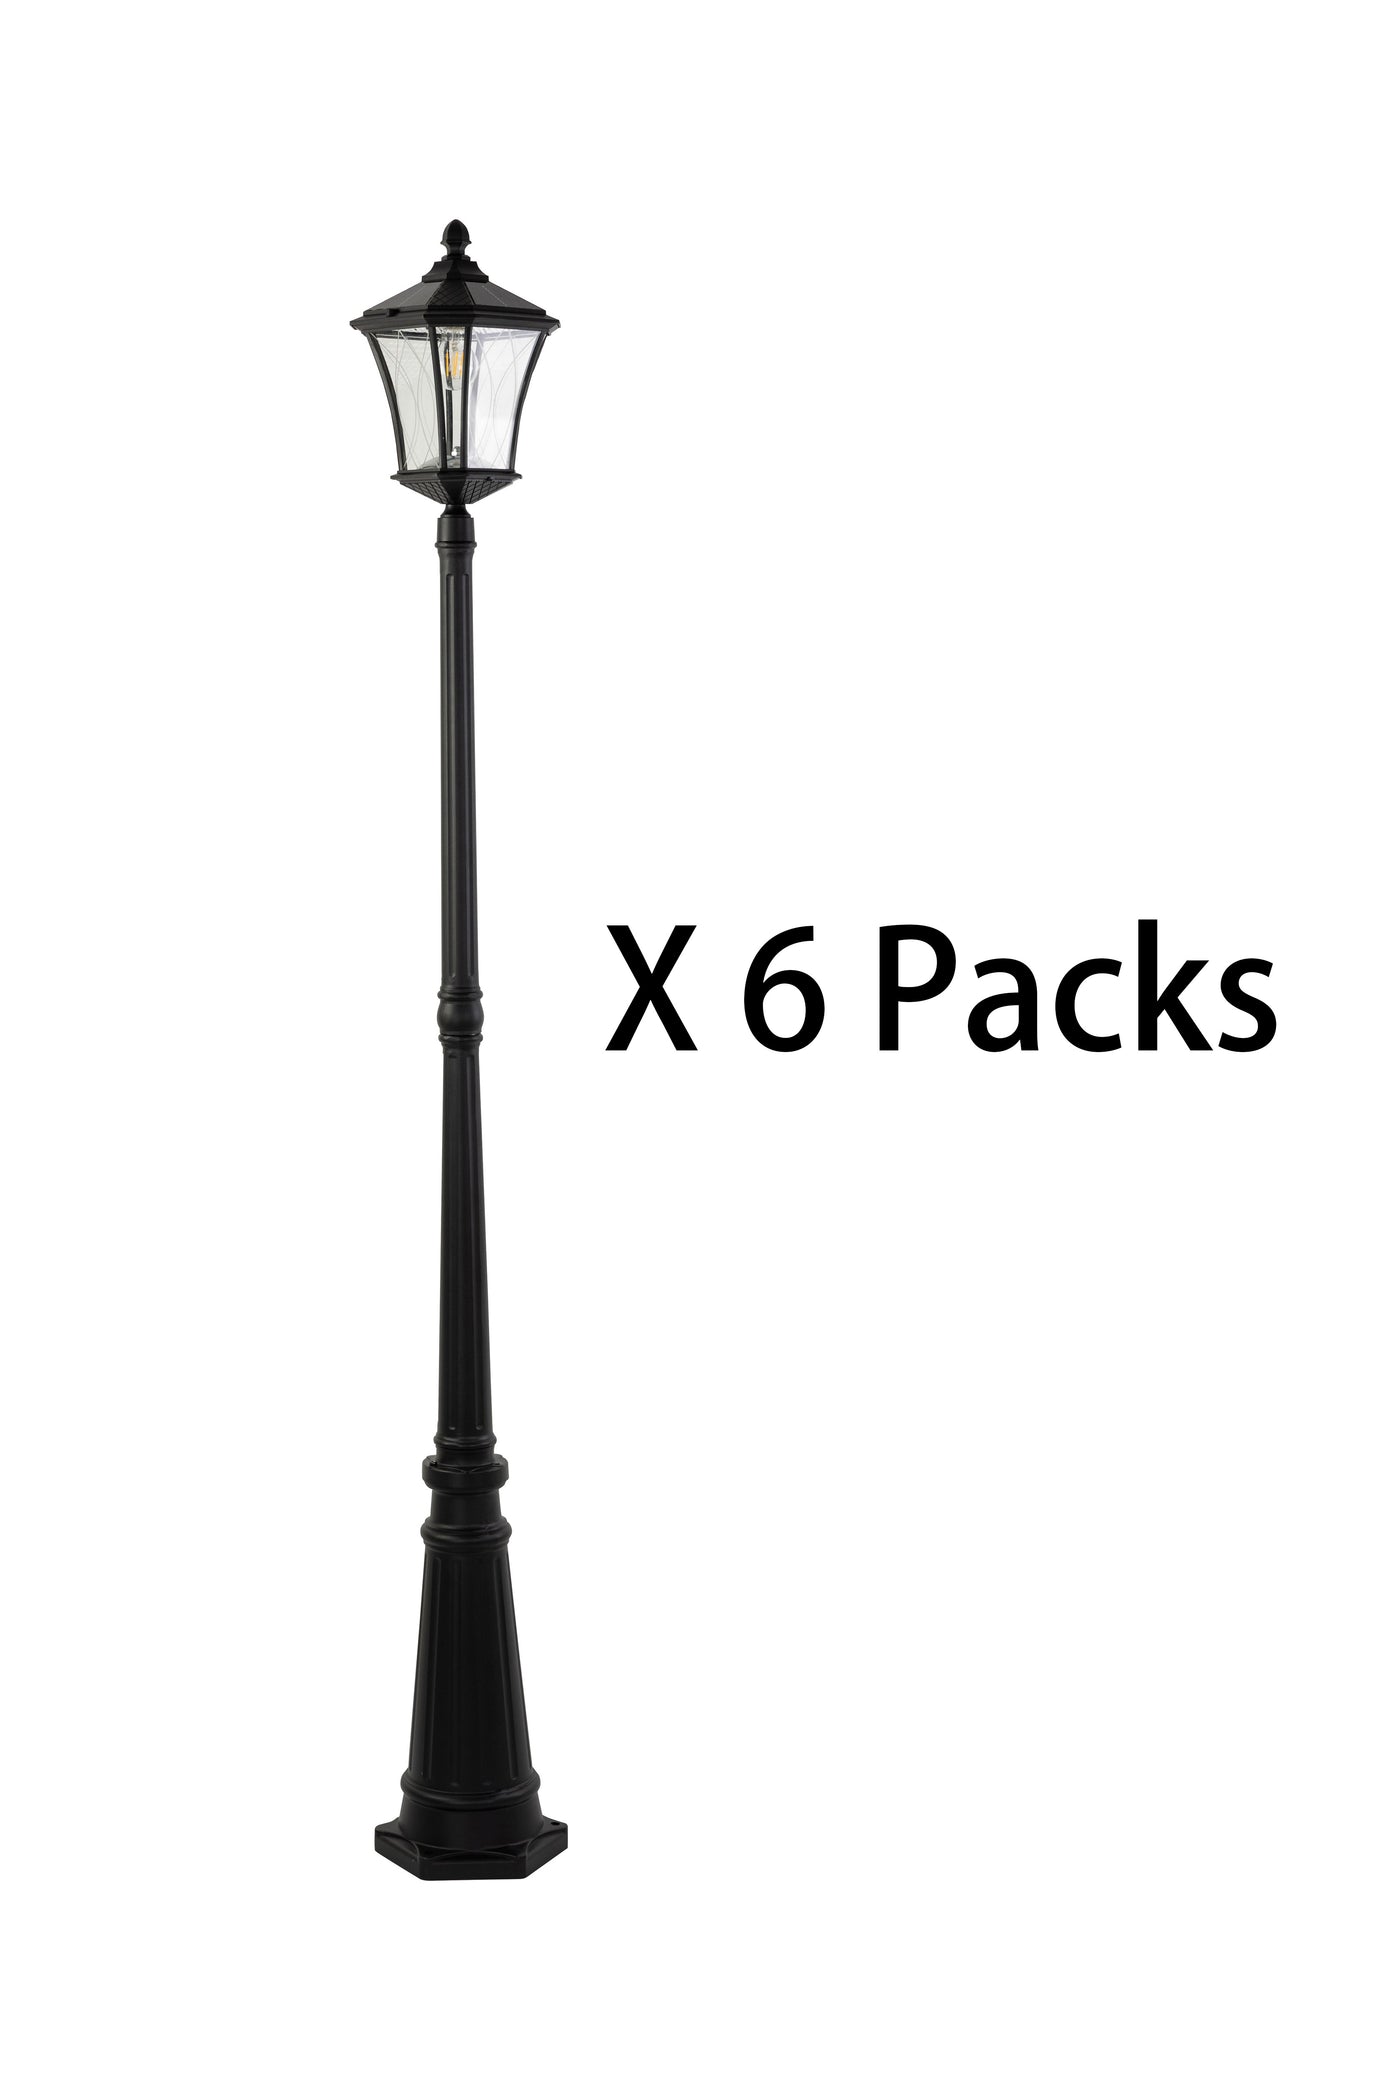 Bundle of LUTEC-Single Head Outdoor Solar Post Light, Dusk to Dawn, 200LM, 2700K, 3.7V, Up To 8hour Runtime, Black(Head+Post), 6 packs